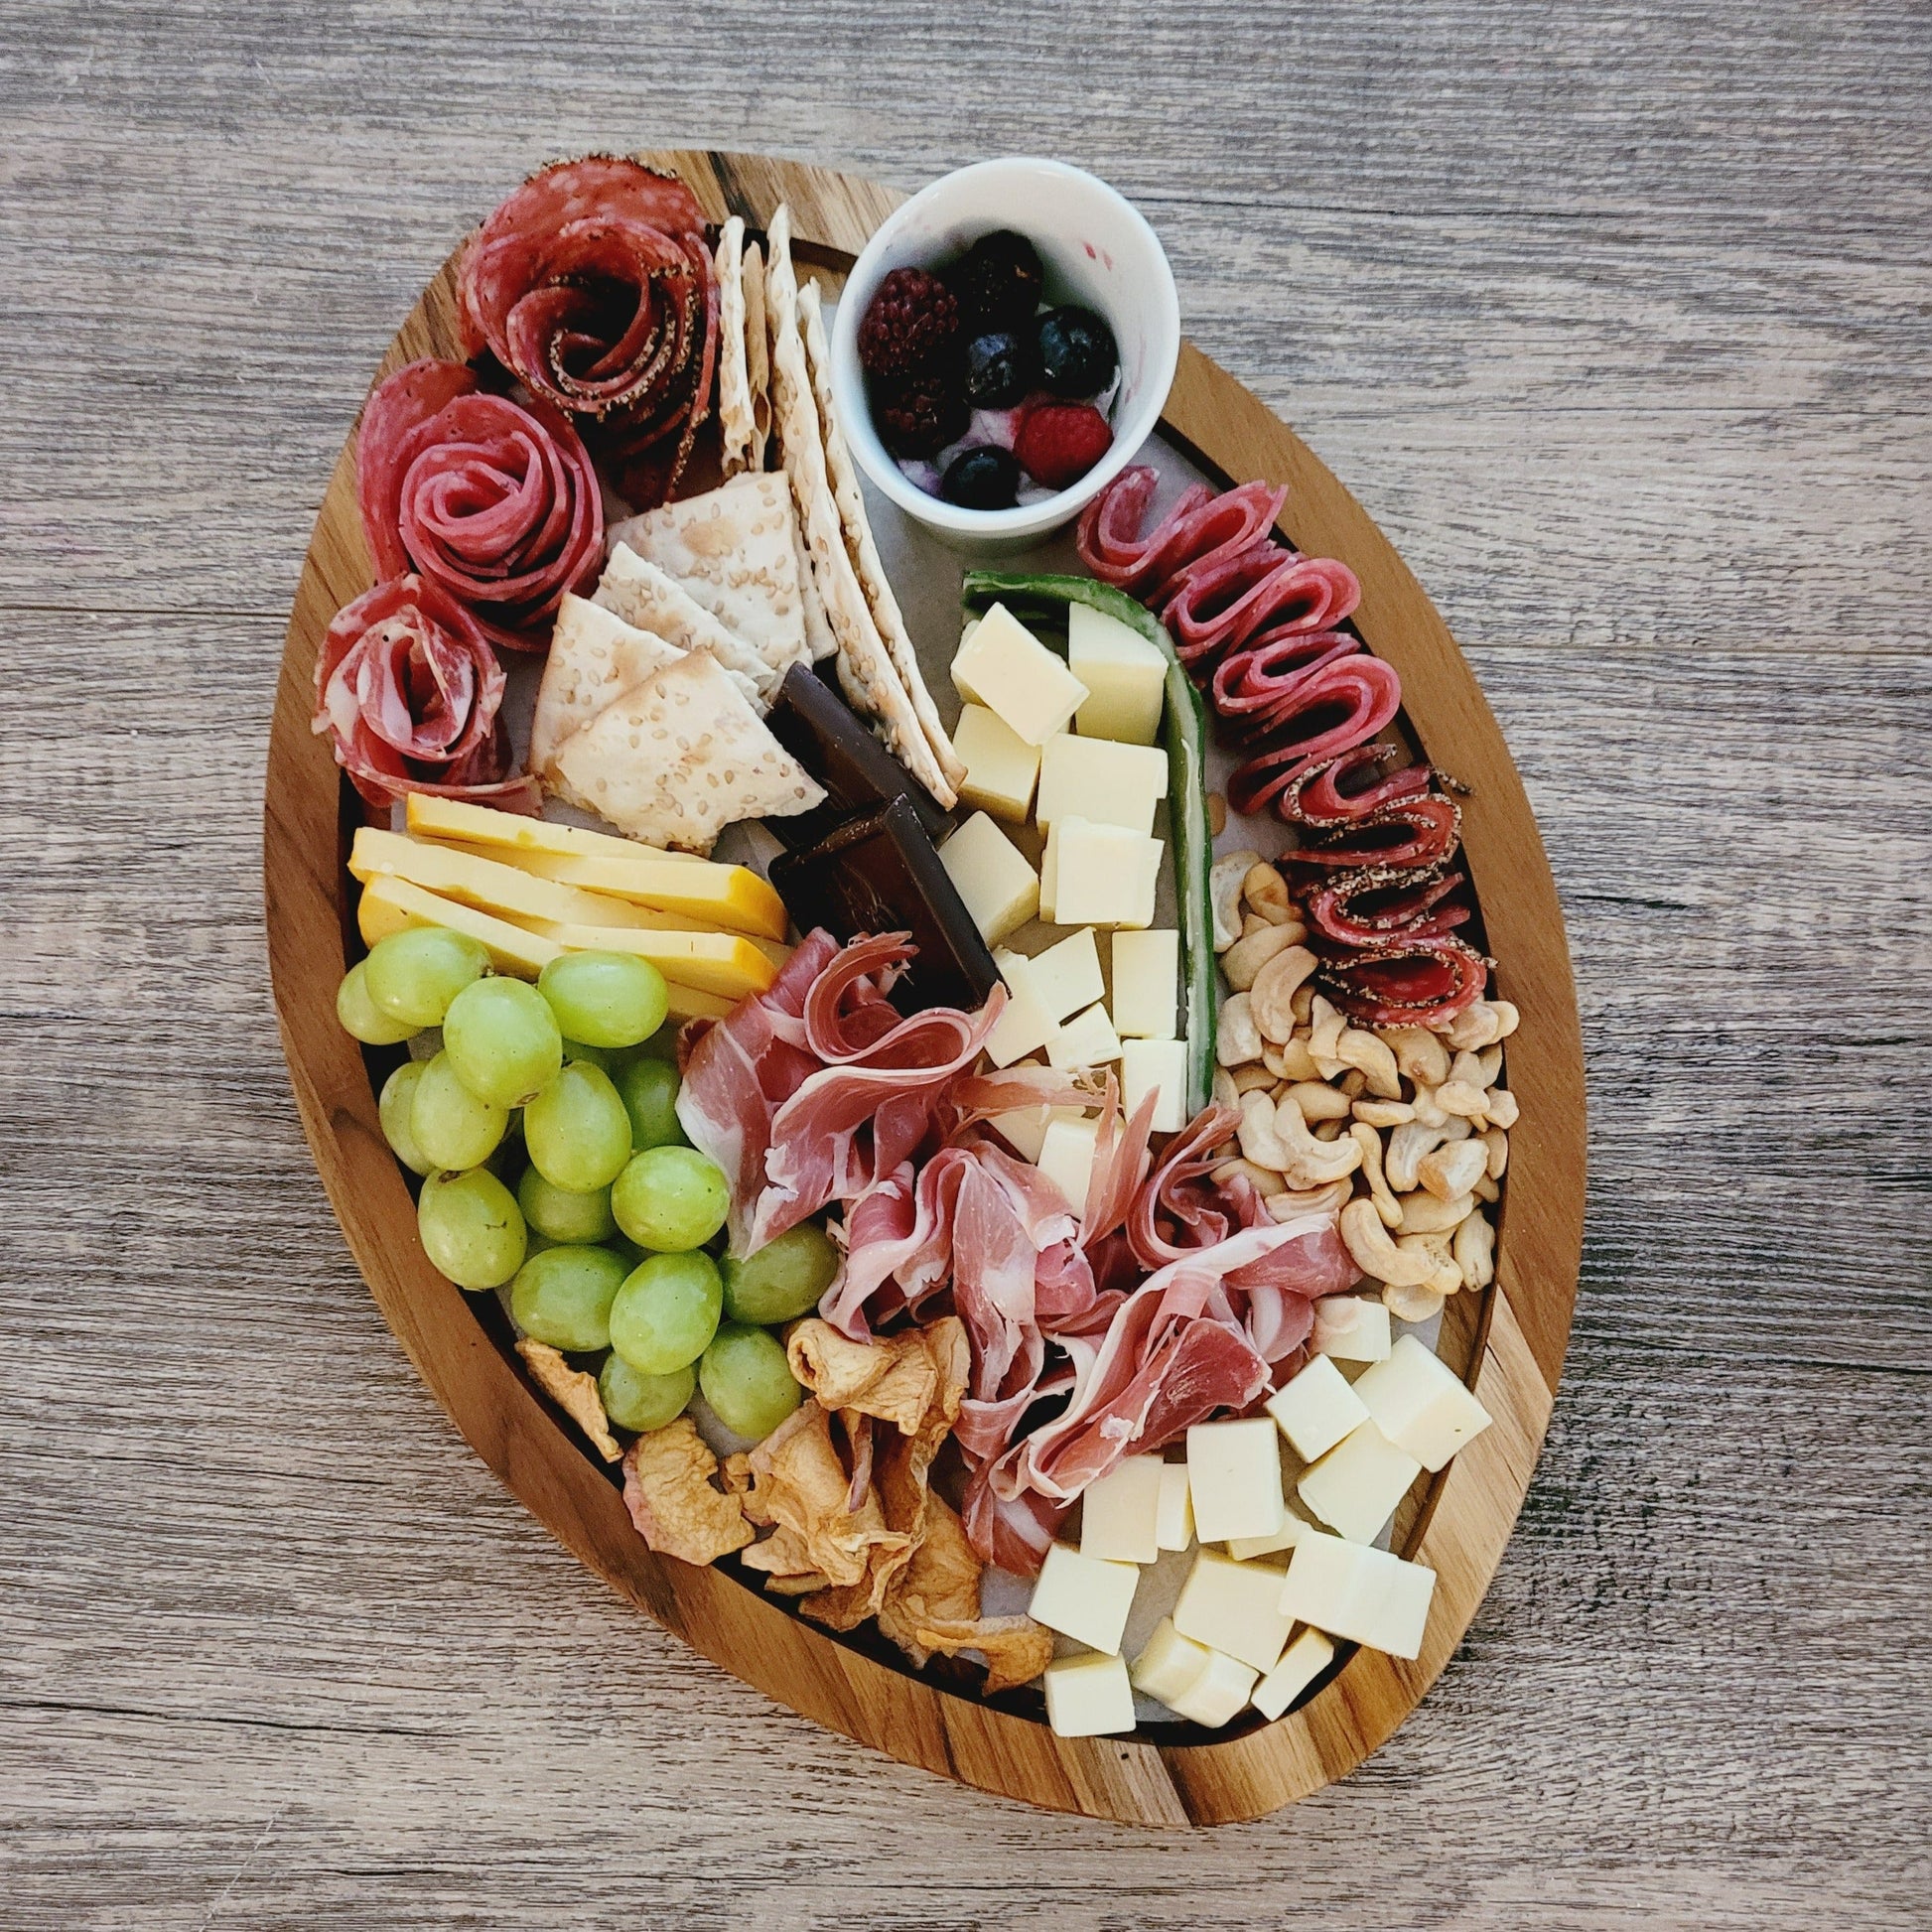 football shaped charcuterie board loaded with meats and cheese selection